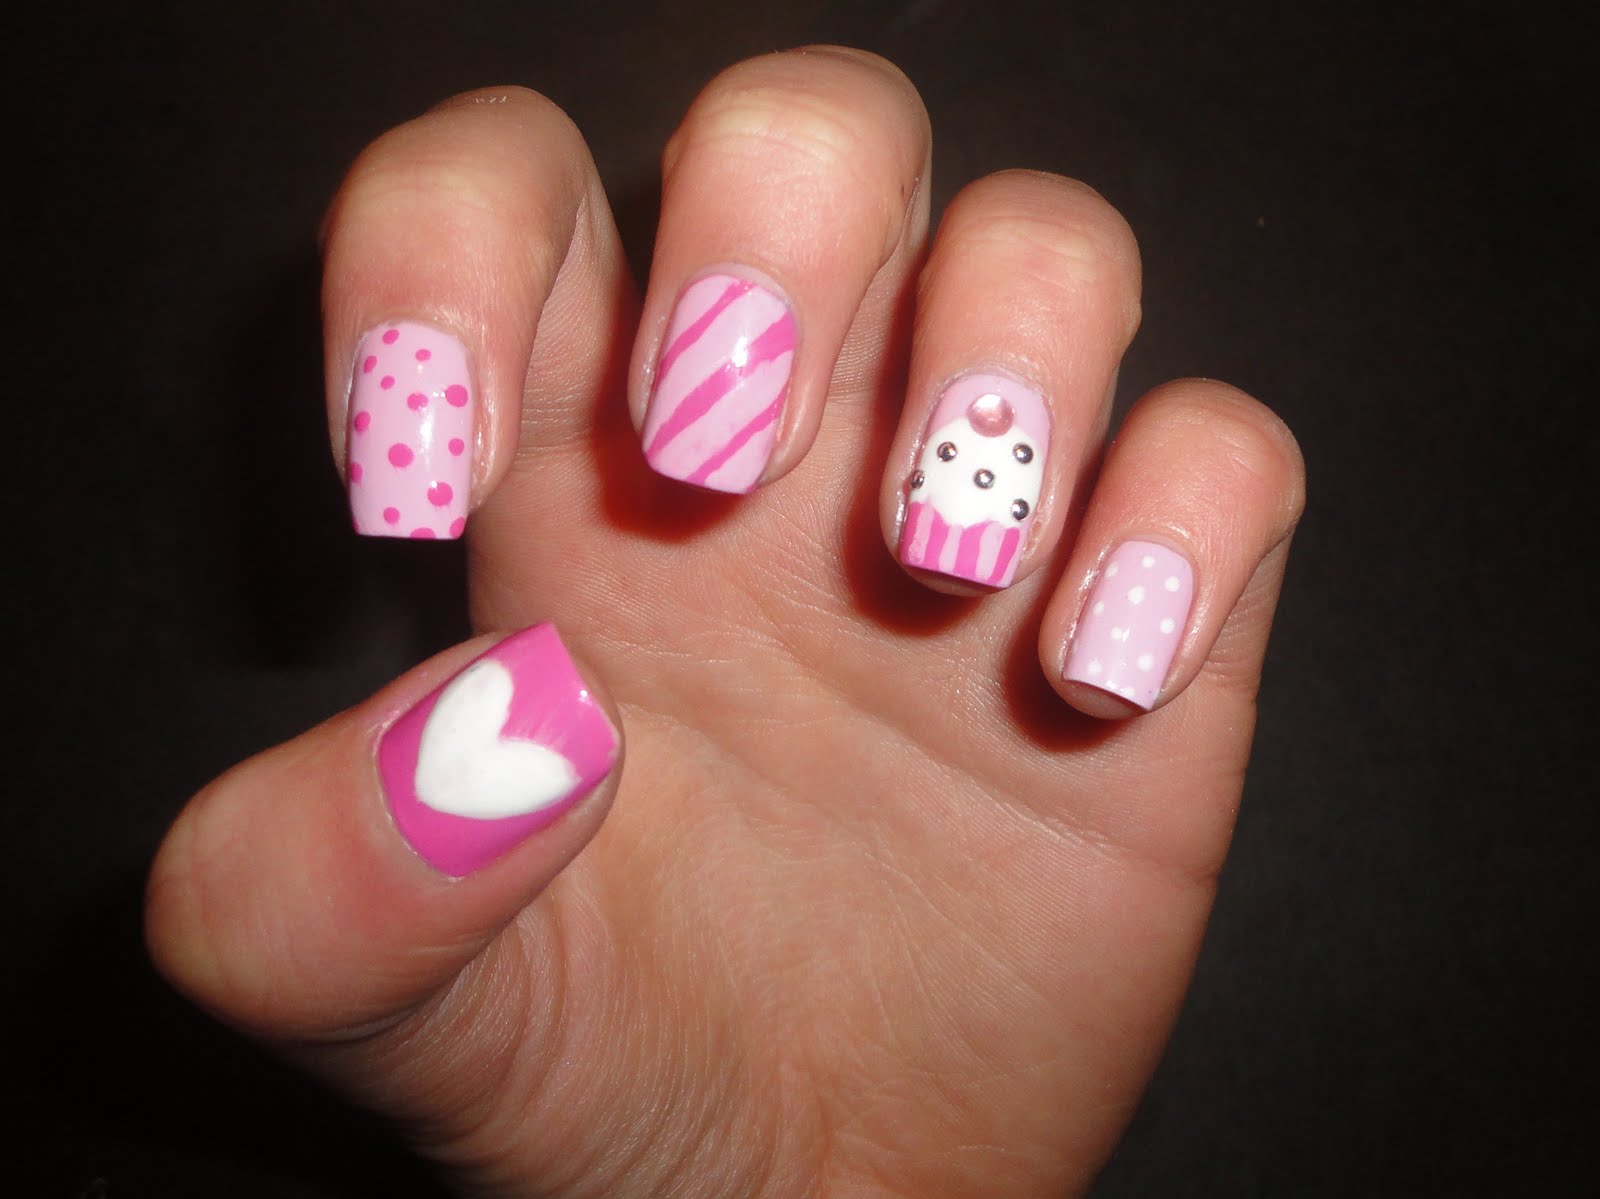 3. Adorable Short Nail Designs for Beginners - wide 6